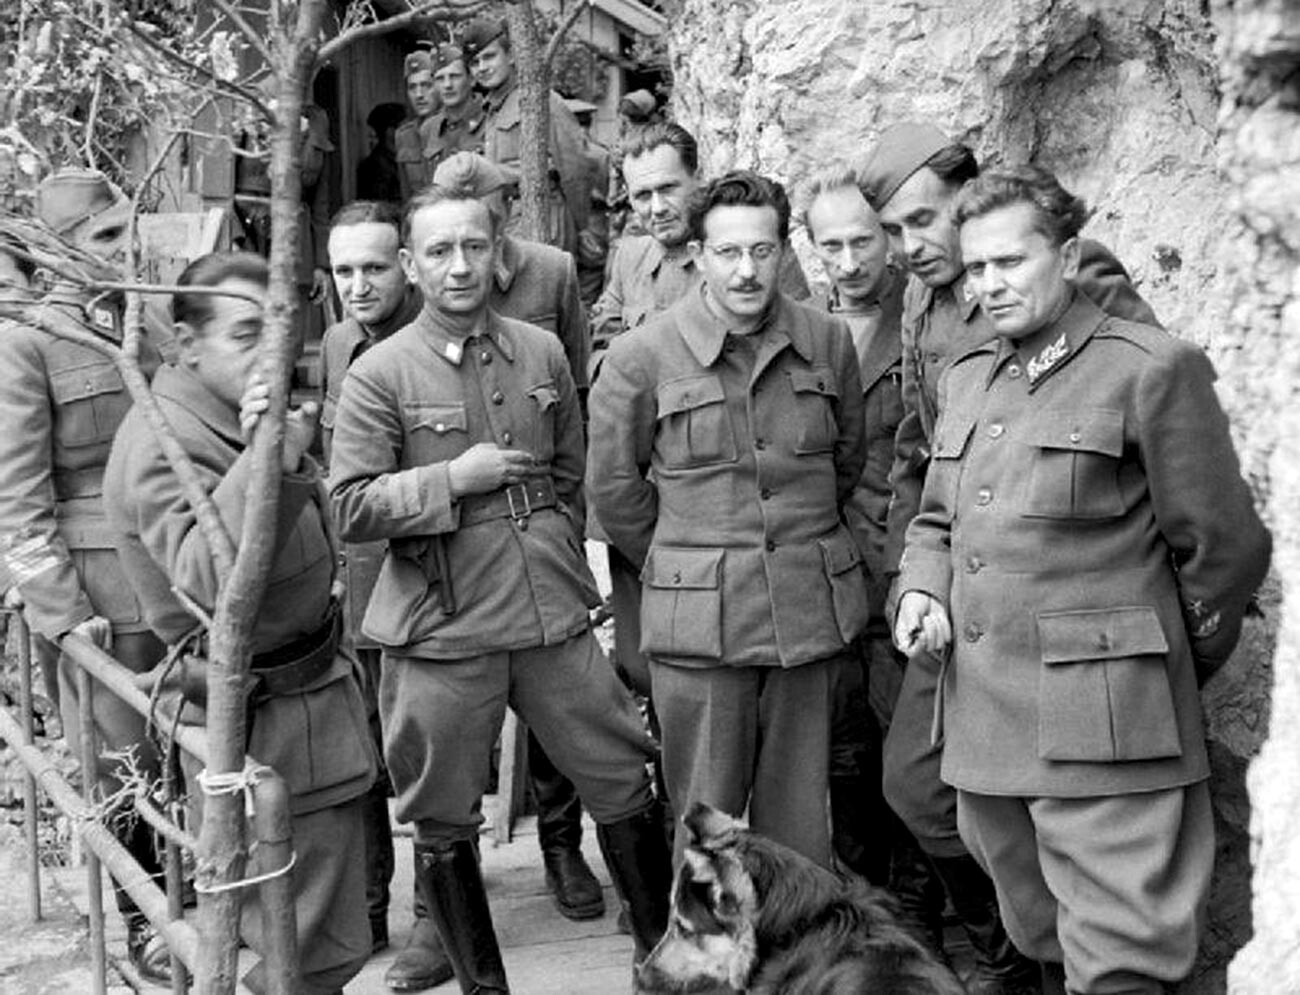 Tito and his comrades in Drvar.